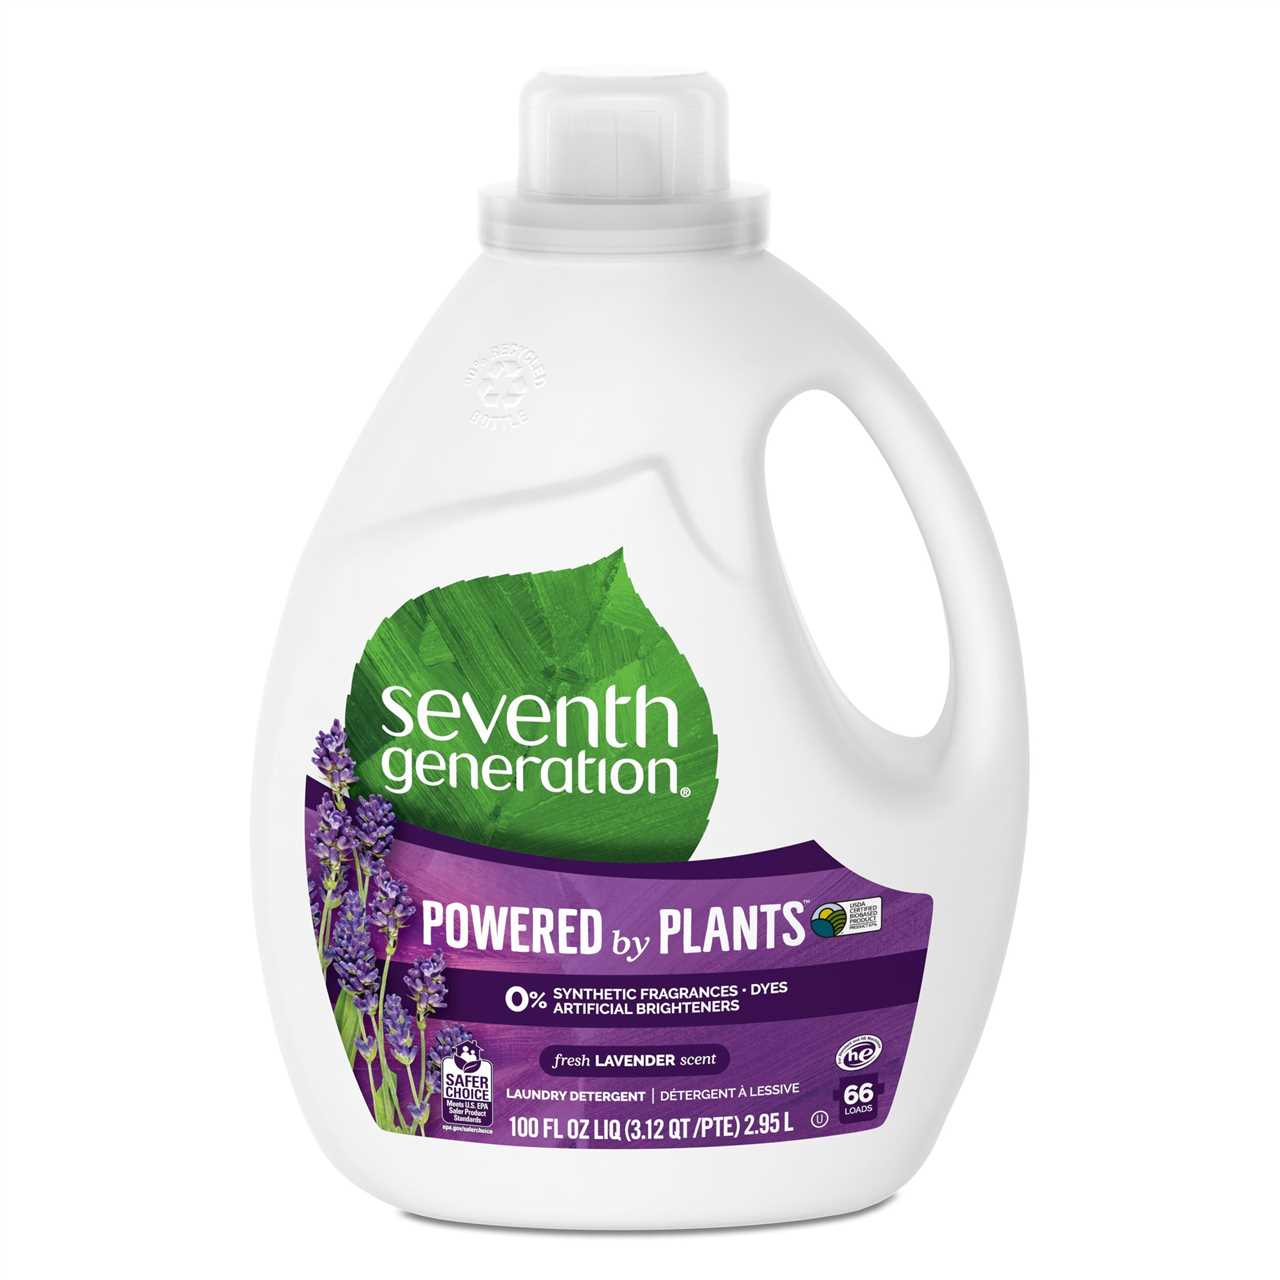 Seventh Generation Laundry Detergent Eco-Friendly and Effective